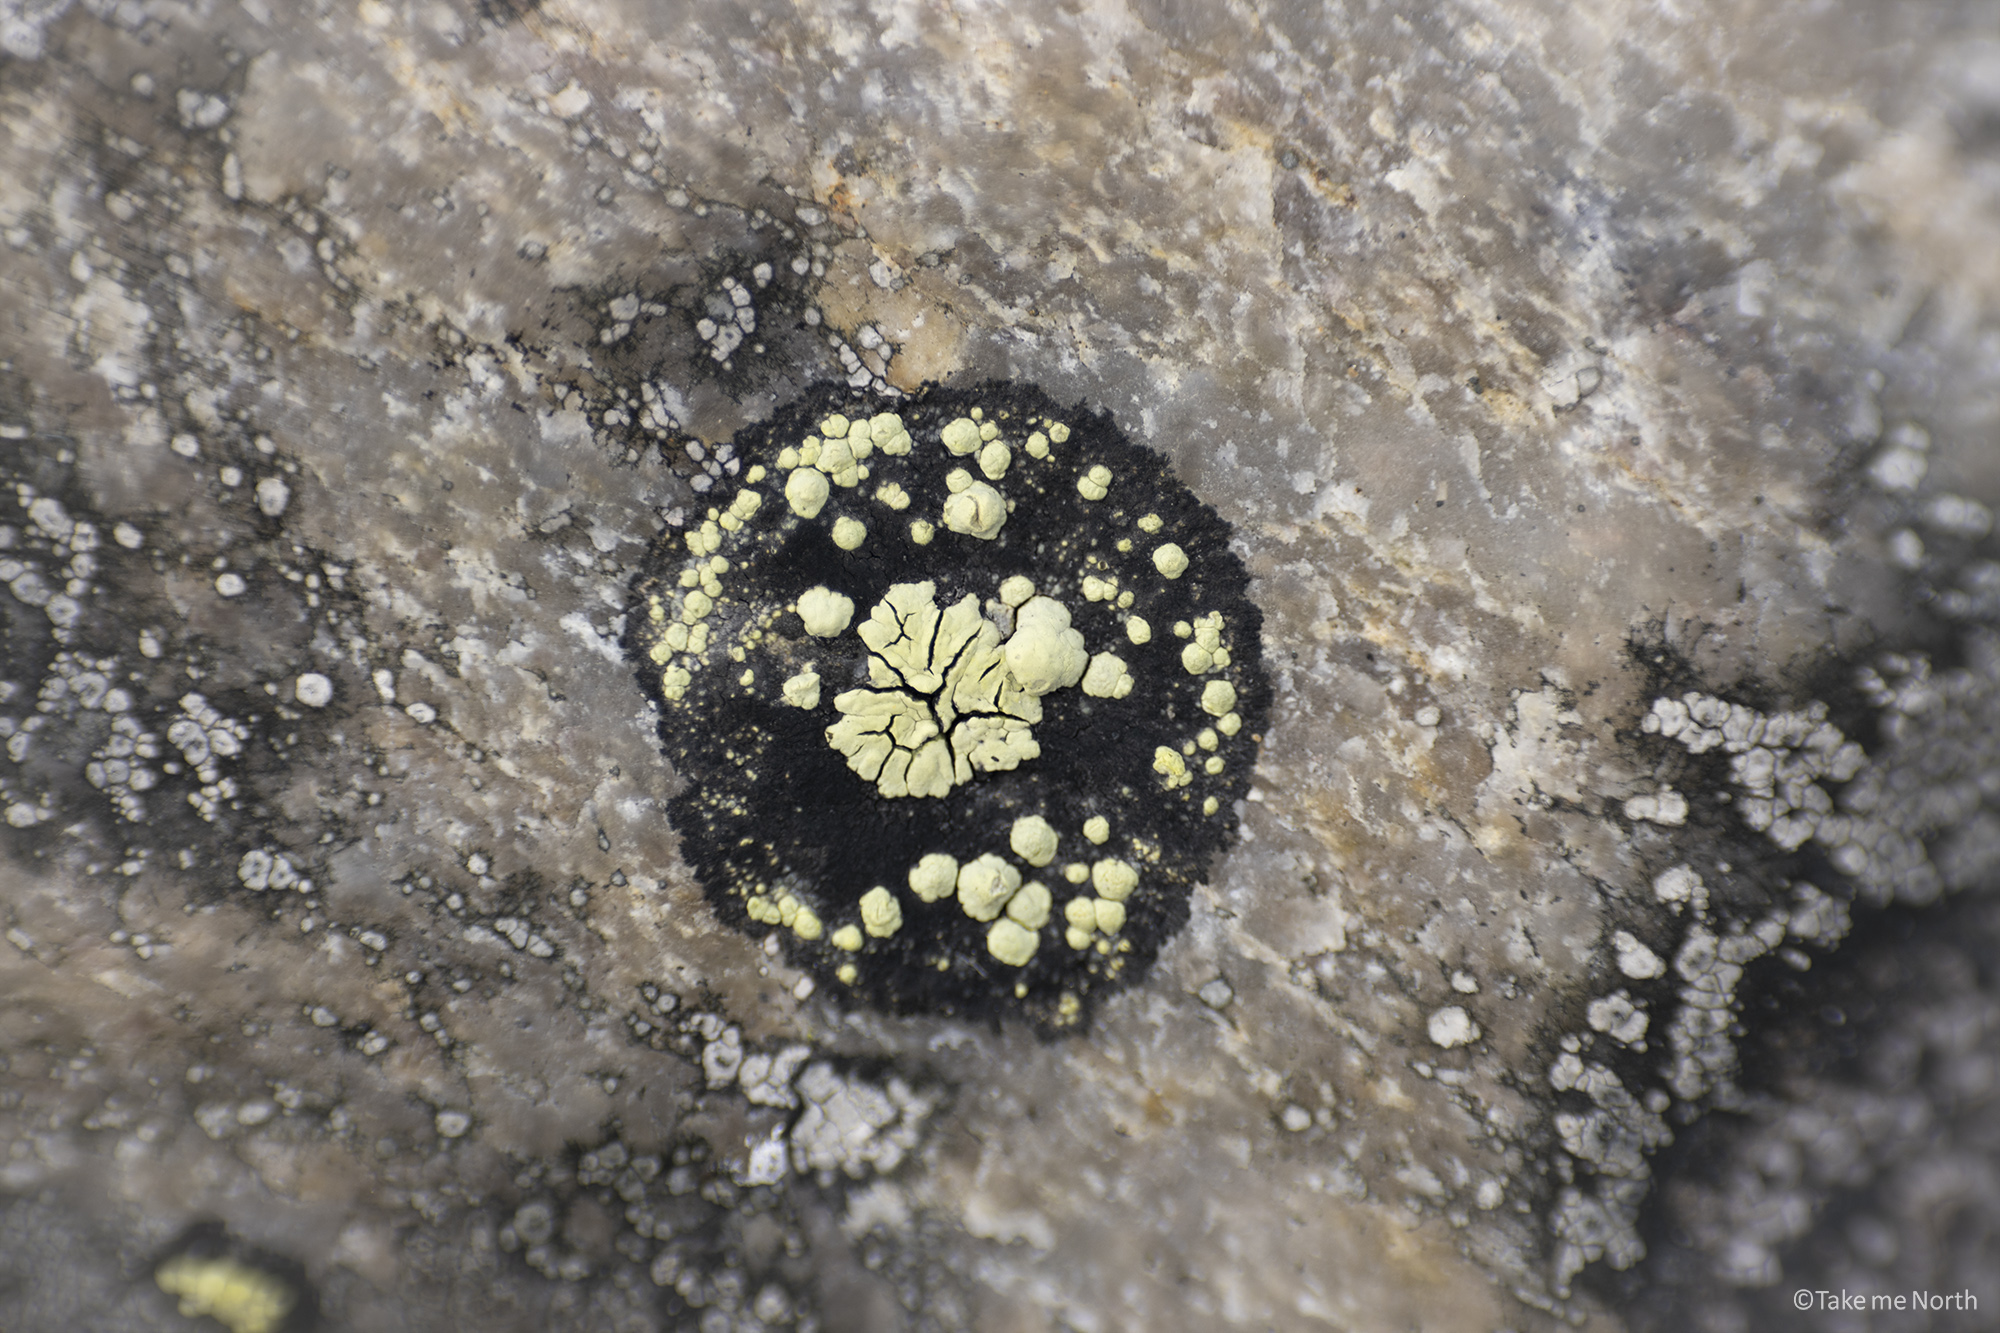 Example of a crustose lichen on a rock surface